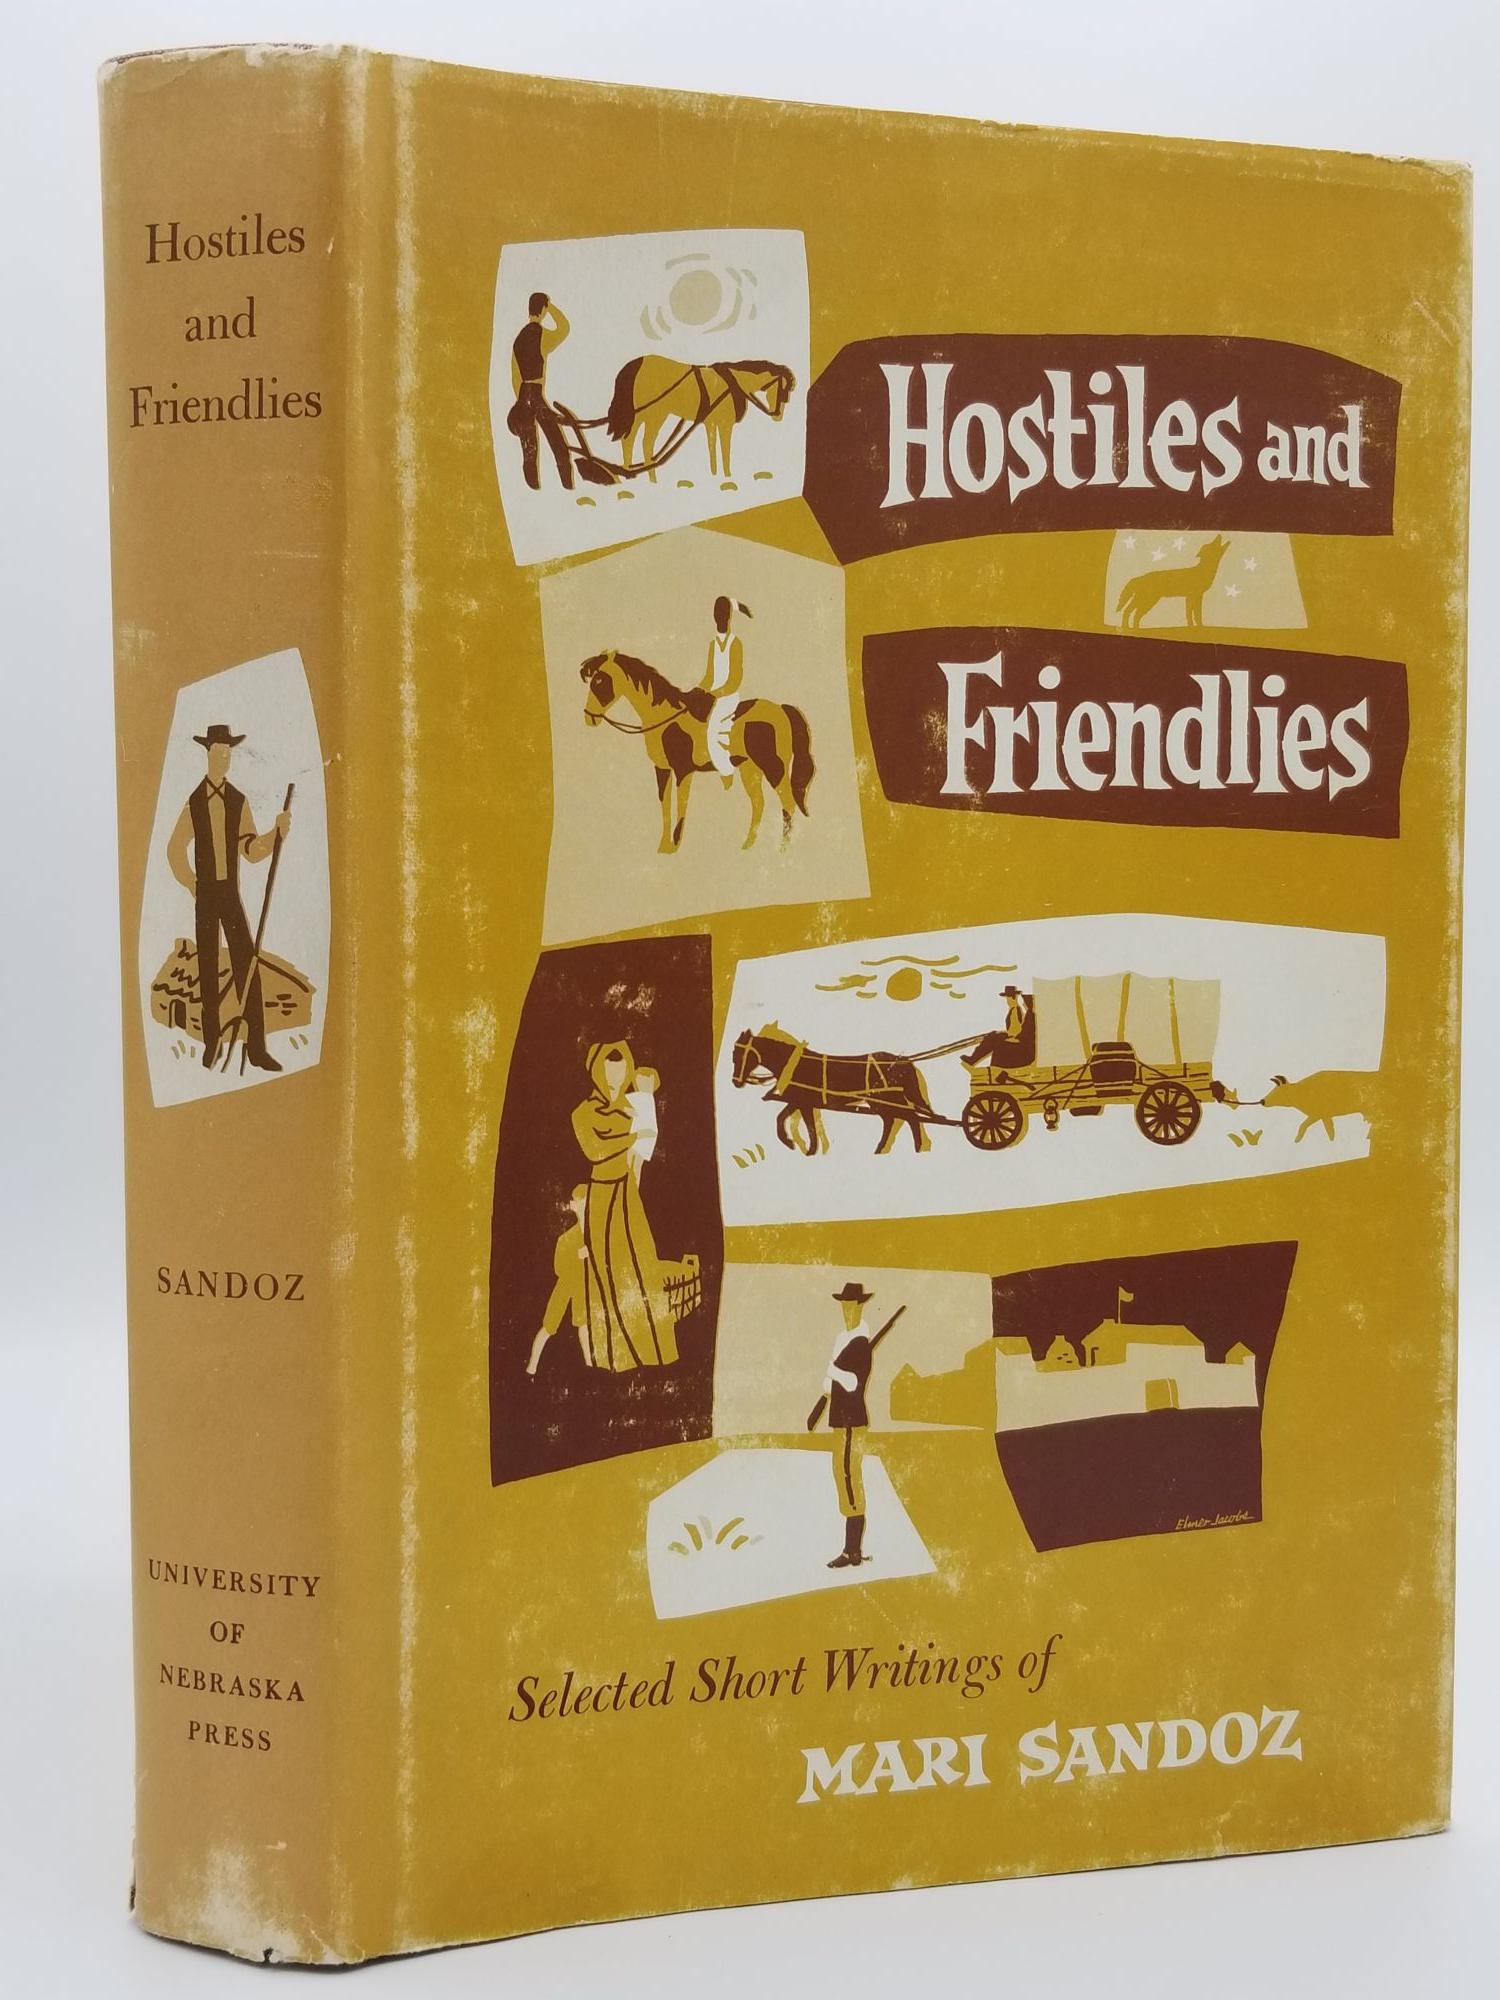 Hostiles and Friendlies; Selected short writings SANDOZ, Mari [Fine] [Hardcover] 8vo. Publisher's illustrated cloth. Illustrated dust jacket. Several illustrated plates and a map. 250 pp. Signed by Sandoz on front free endpaper. A fine copy in very good jacket. Jacket has some mild scuffing and a 1/2  closed tear at footer of spine. This is a signed first edition of the collected short writings of classic Western author Sandoz.